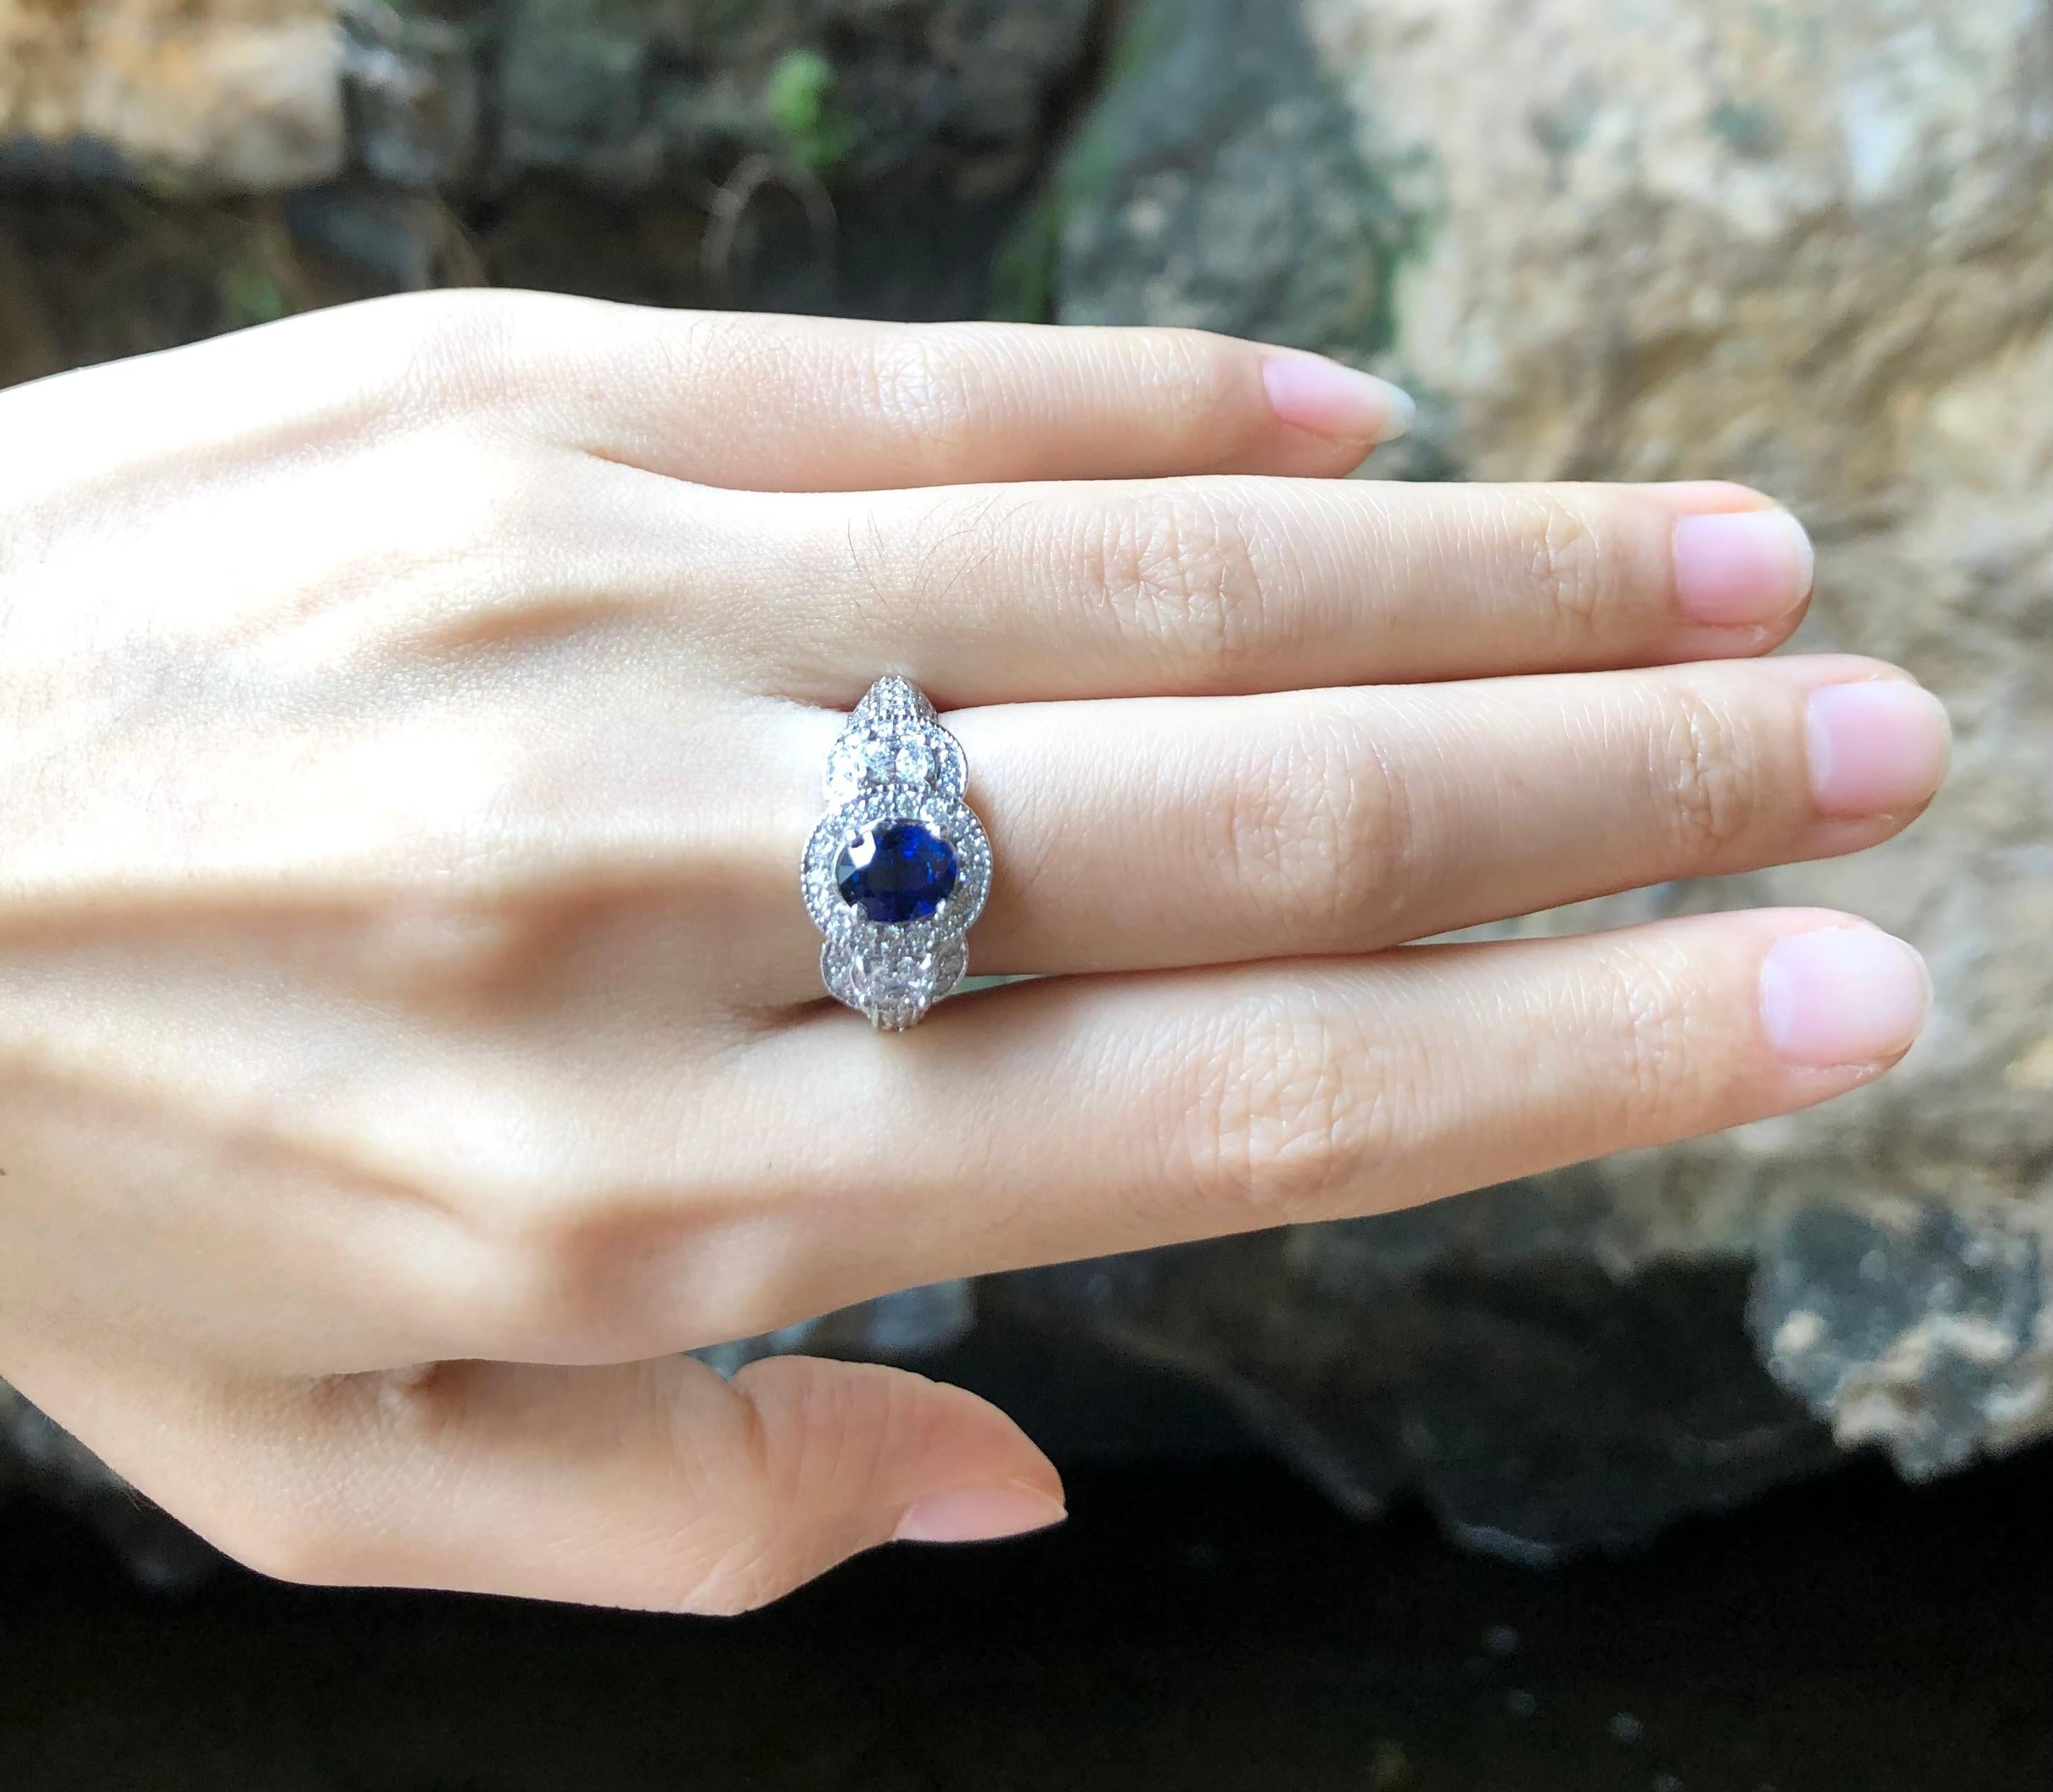 Blue Sapphire 1.27 carats with Diamond 1.01 carats Ring set in 18 Karat White Gold Settings

Width:  1.7 cm 
Length: 1.1 cm
Ring Size: 53
Total Weight: 8.16 grams

Blue Sapphire 
Width:  0.5 cm 
Length: 0.6 cm

